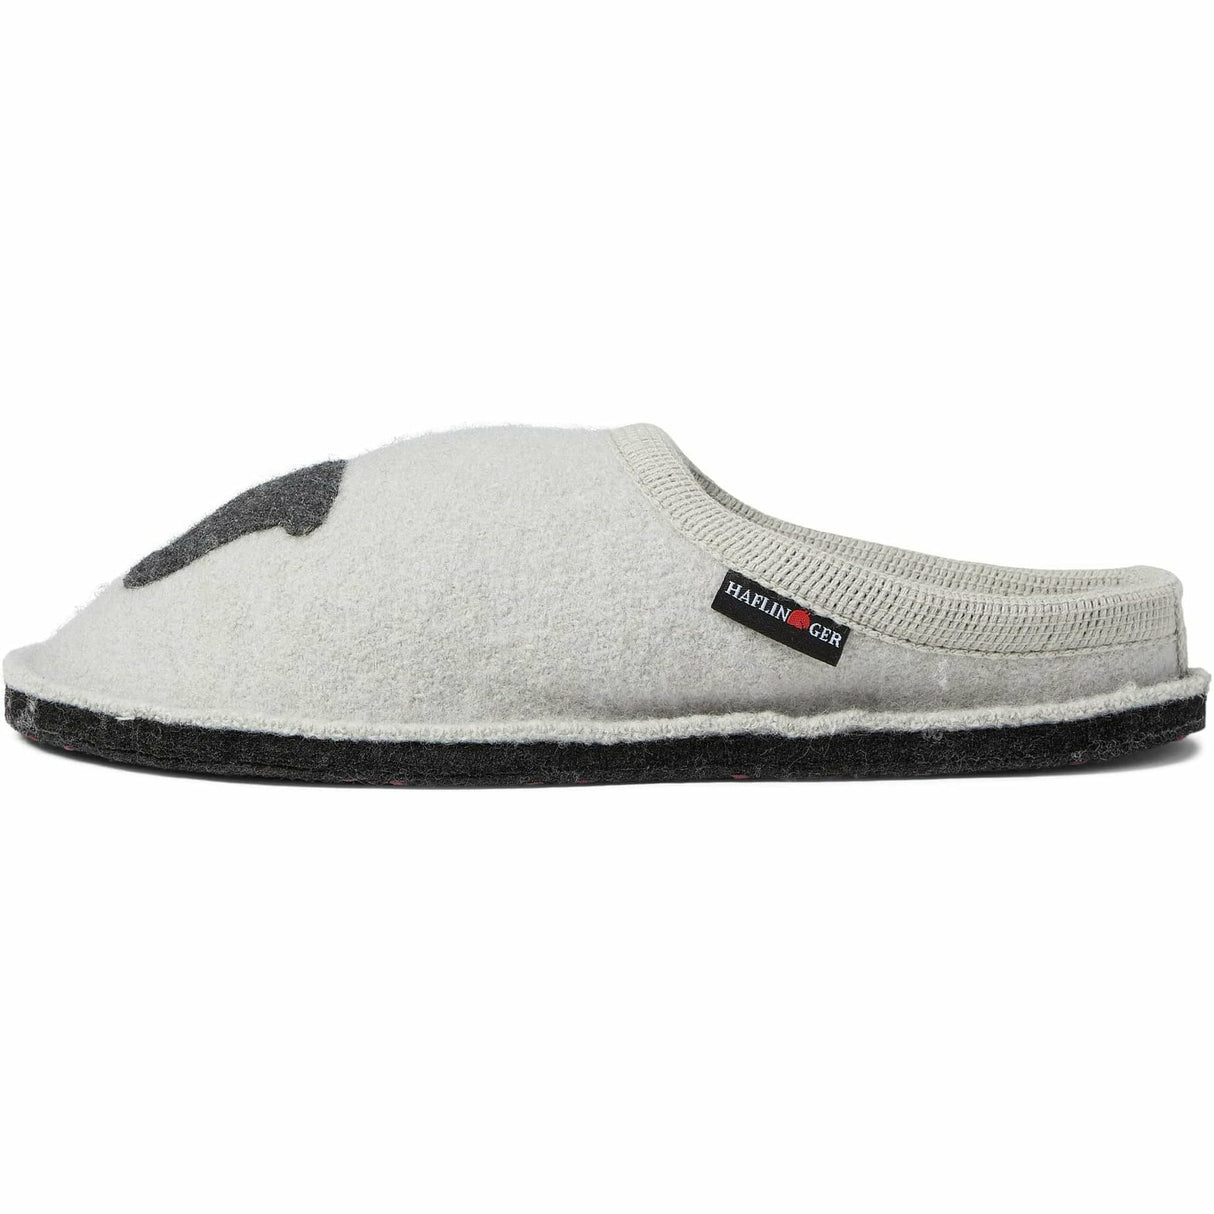 Haflinger Puppy Wool Slippers  - 